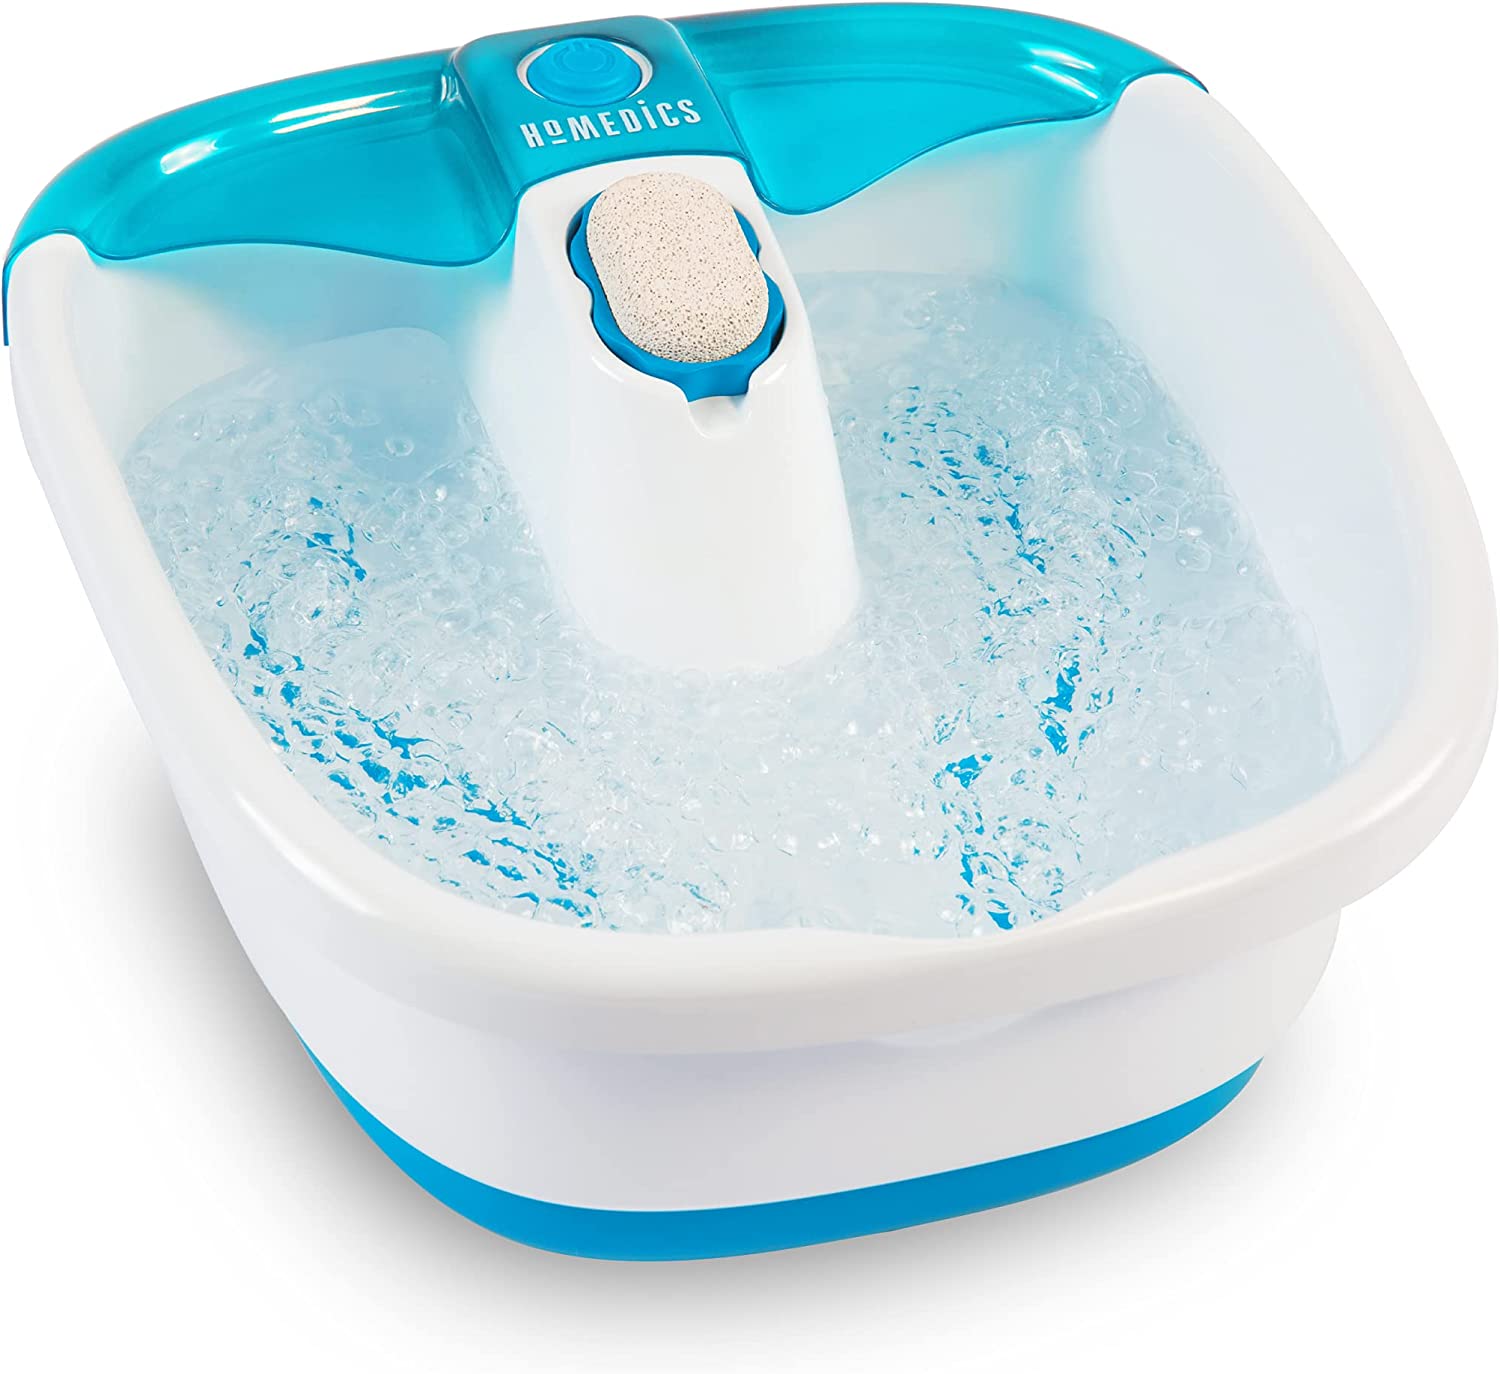 How To Use A Homedics Foot Spa